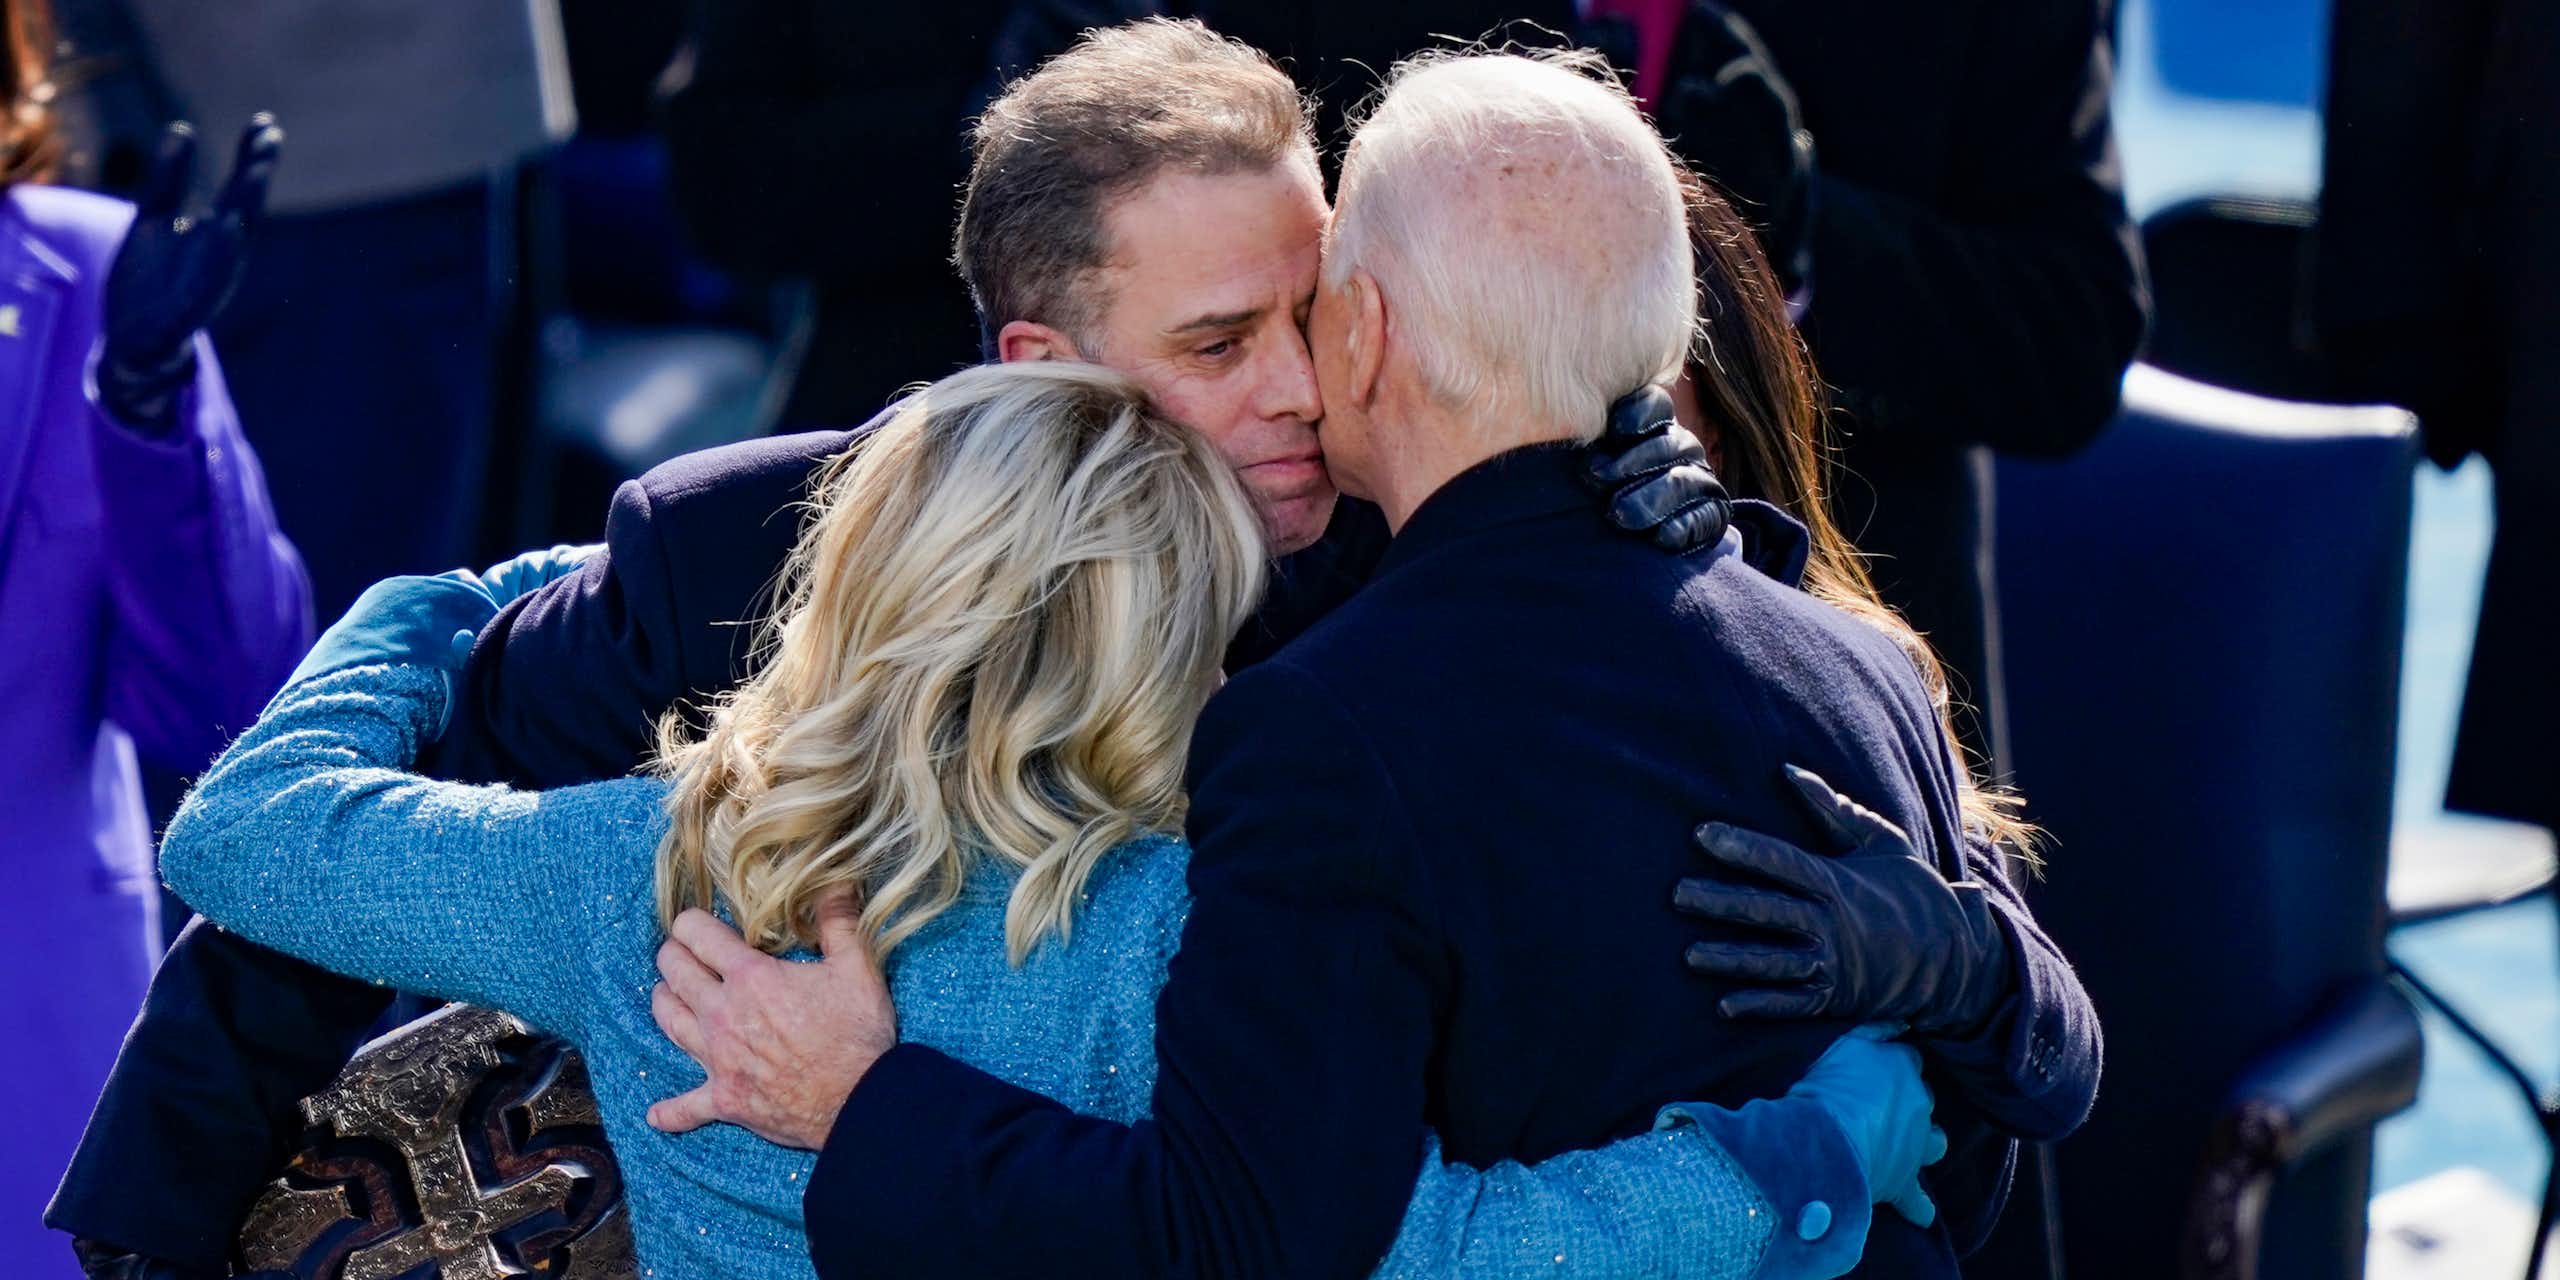 A white man wearing a blue jacket embraces another man with white hair and a woman with blond hair. 